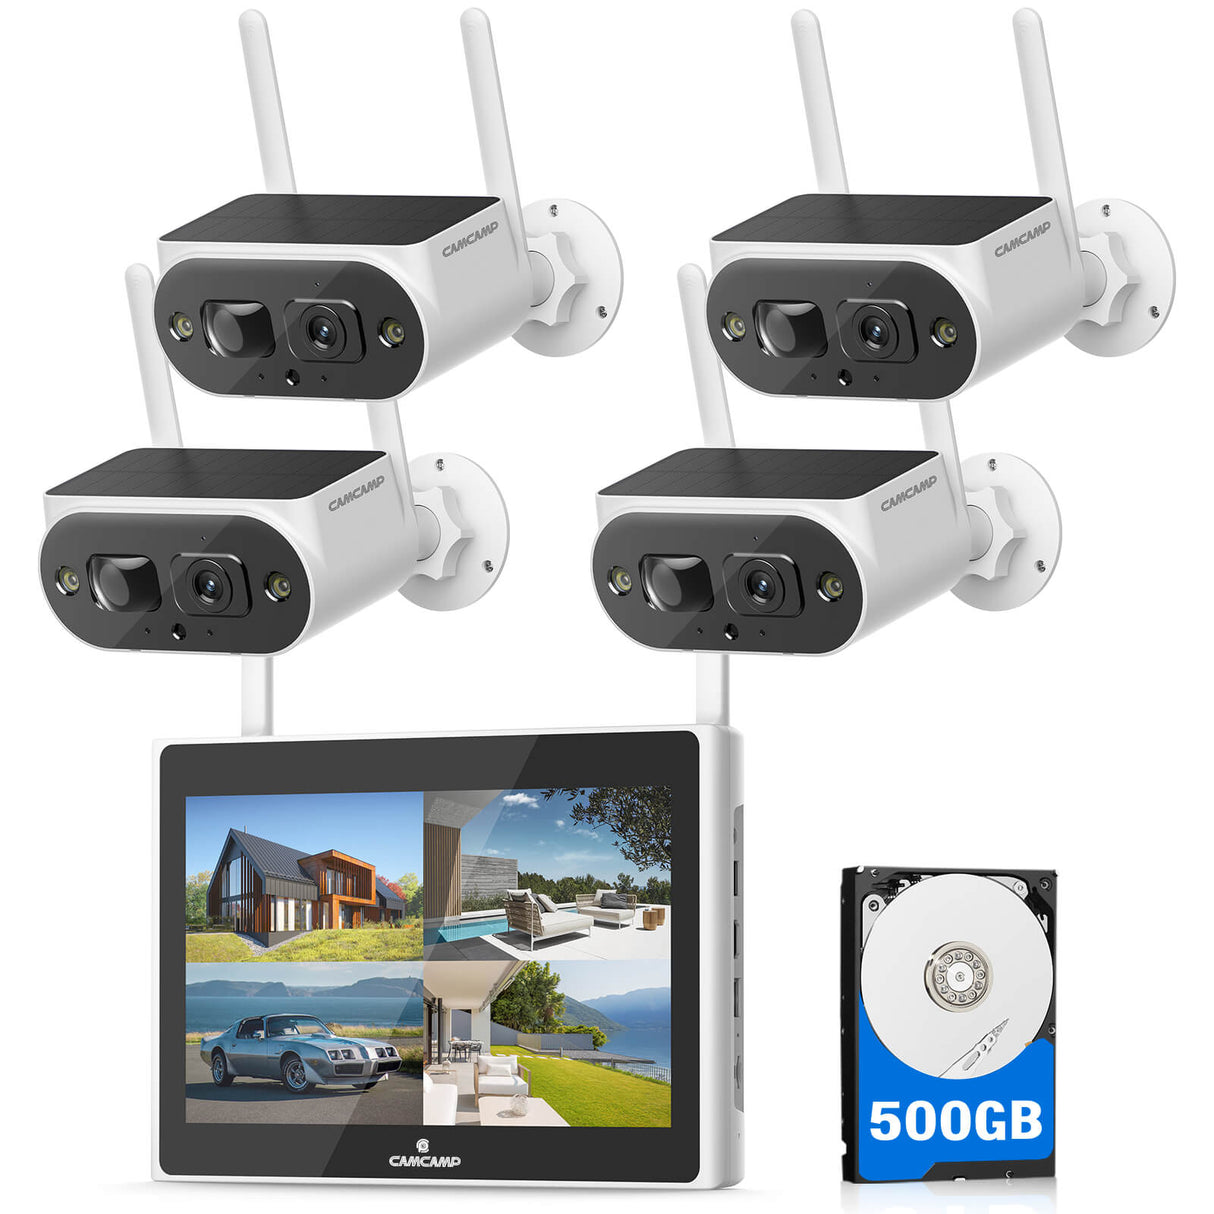 Camcamp SC41 Solar Wireless Security Camera System with 10" LCD Monitor & 500GB HDD